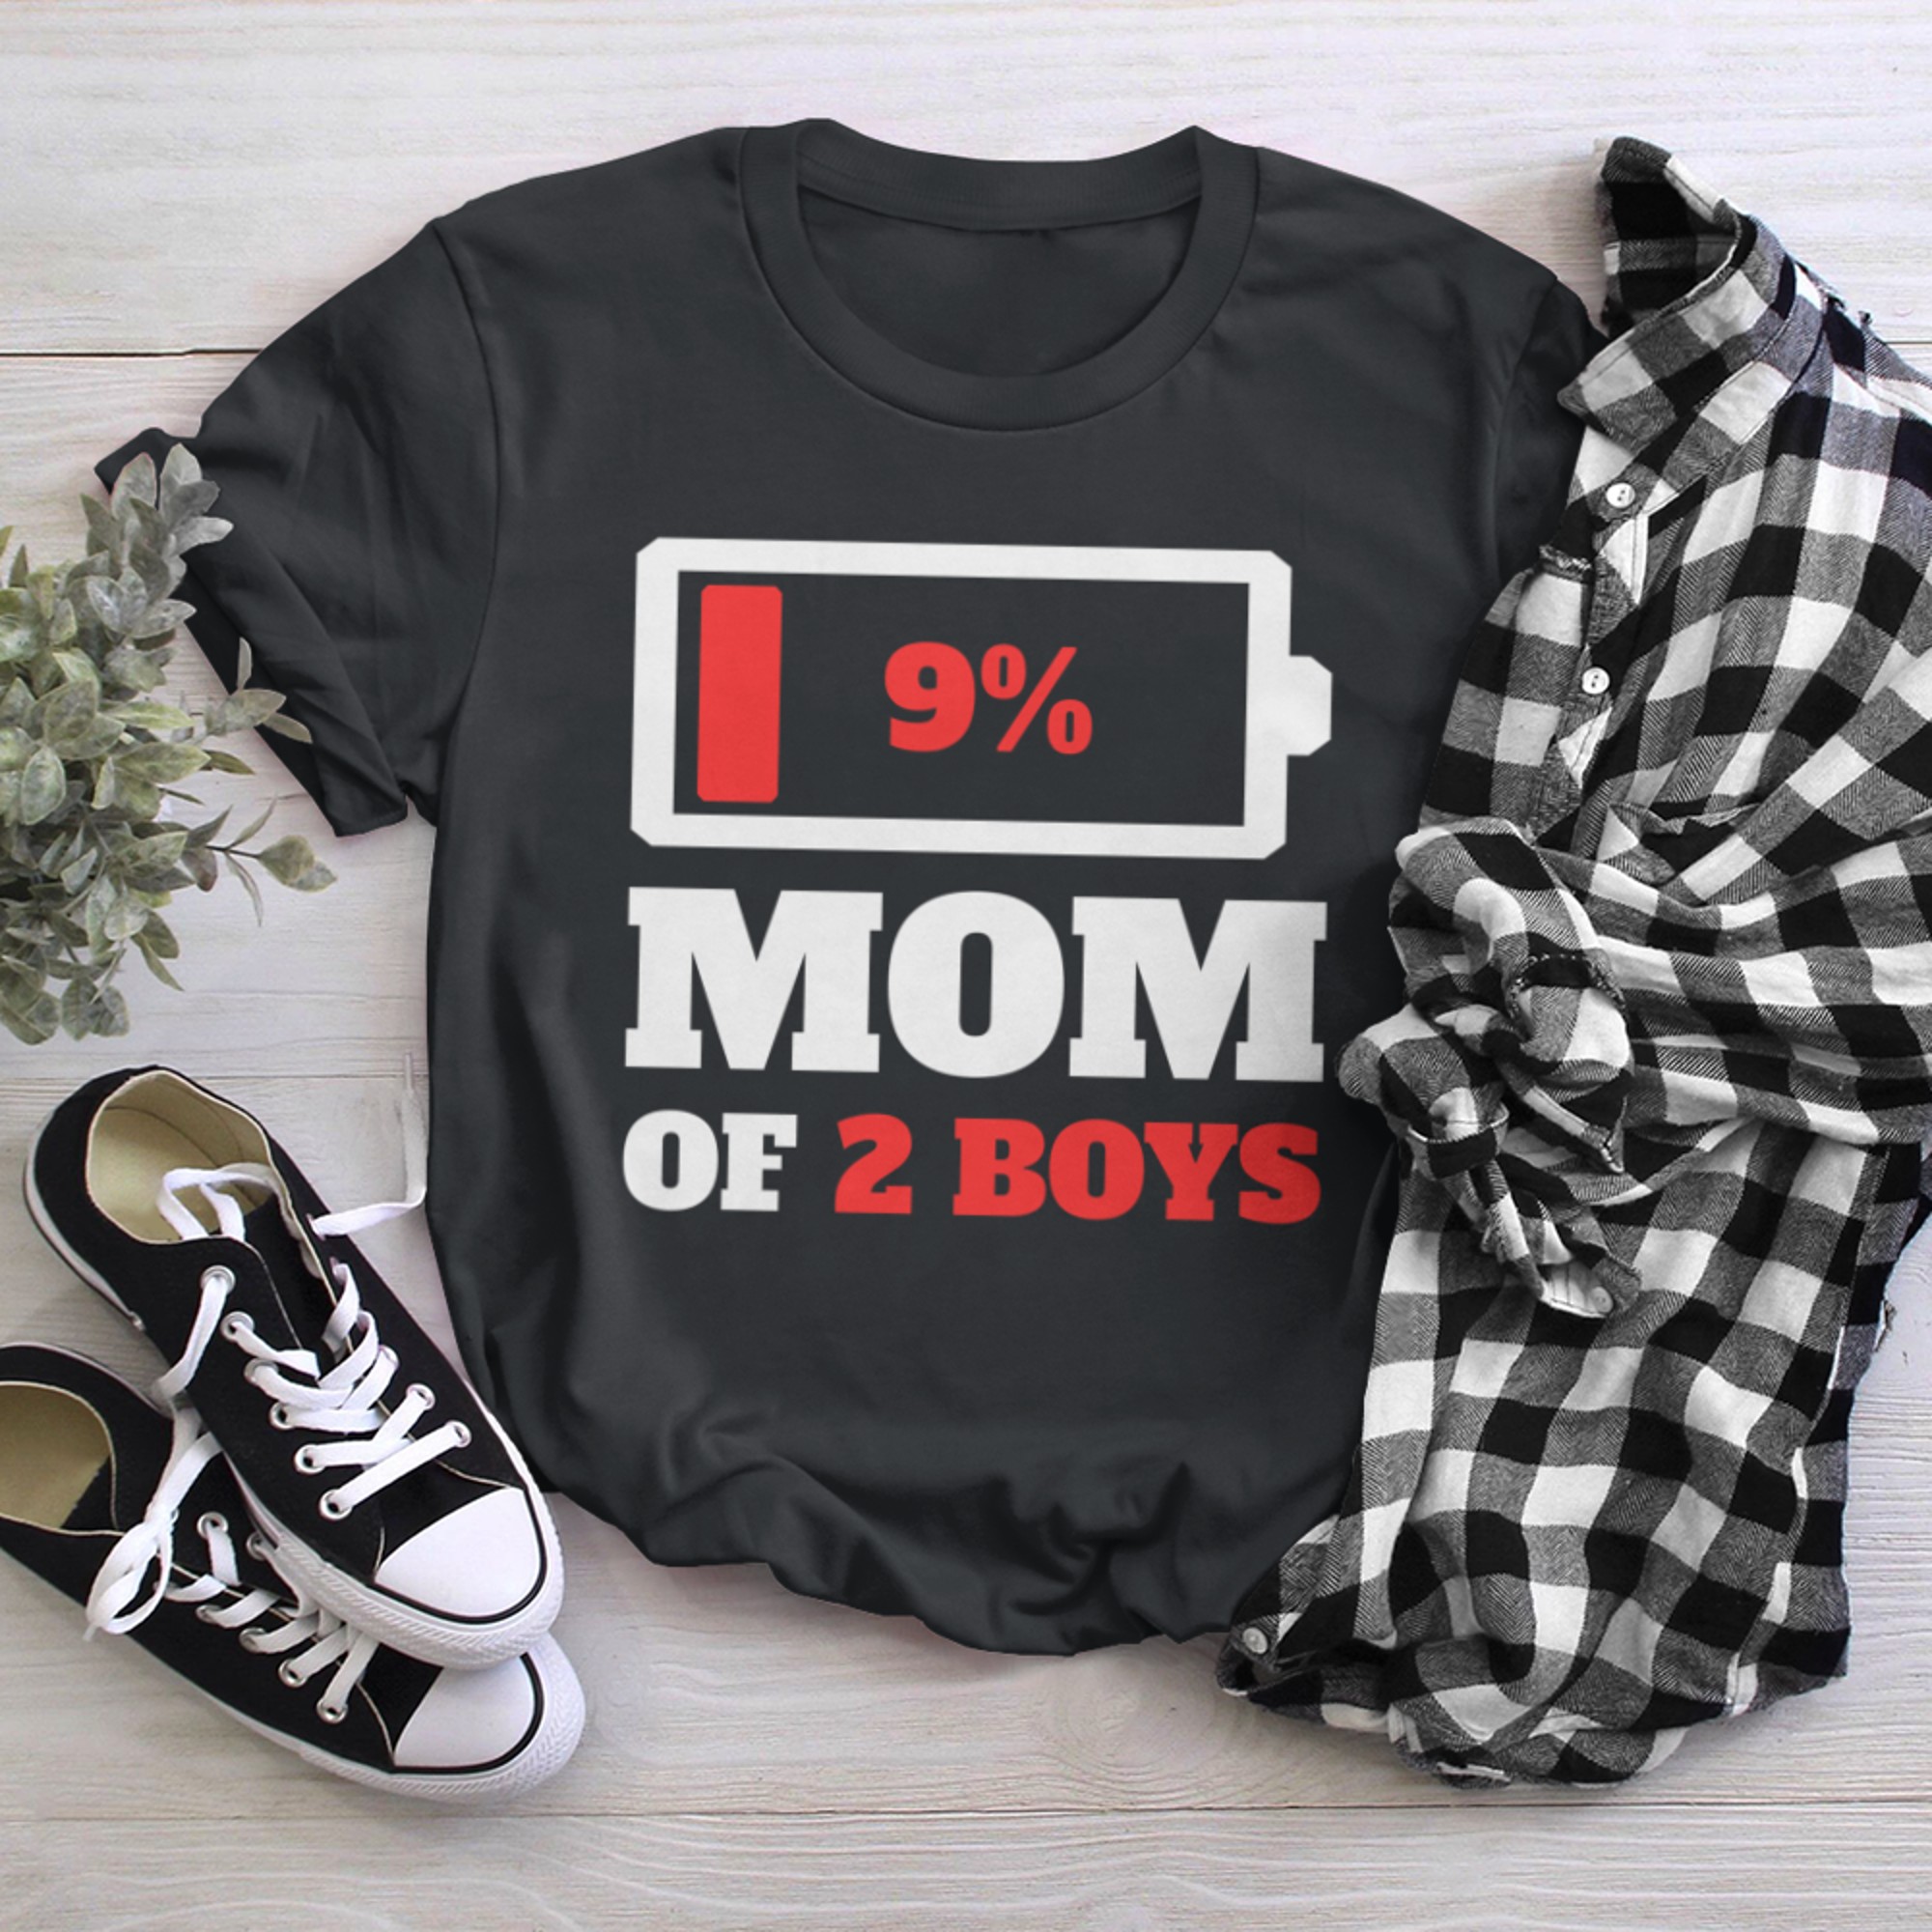 Mom Of Two Sons Tired Mom Low Battery Energy Mother t-shirt black